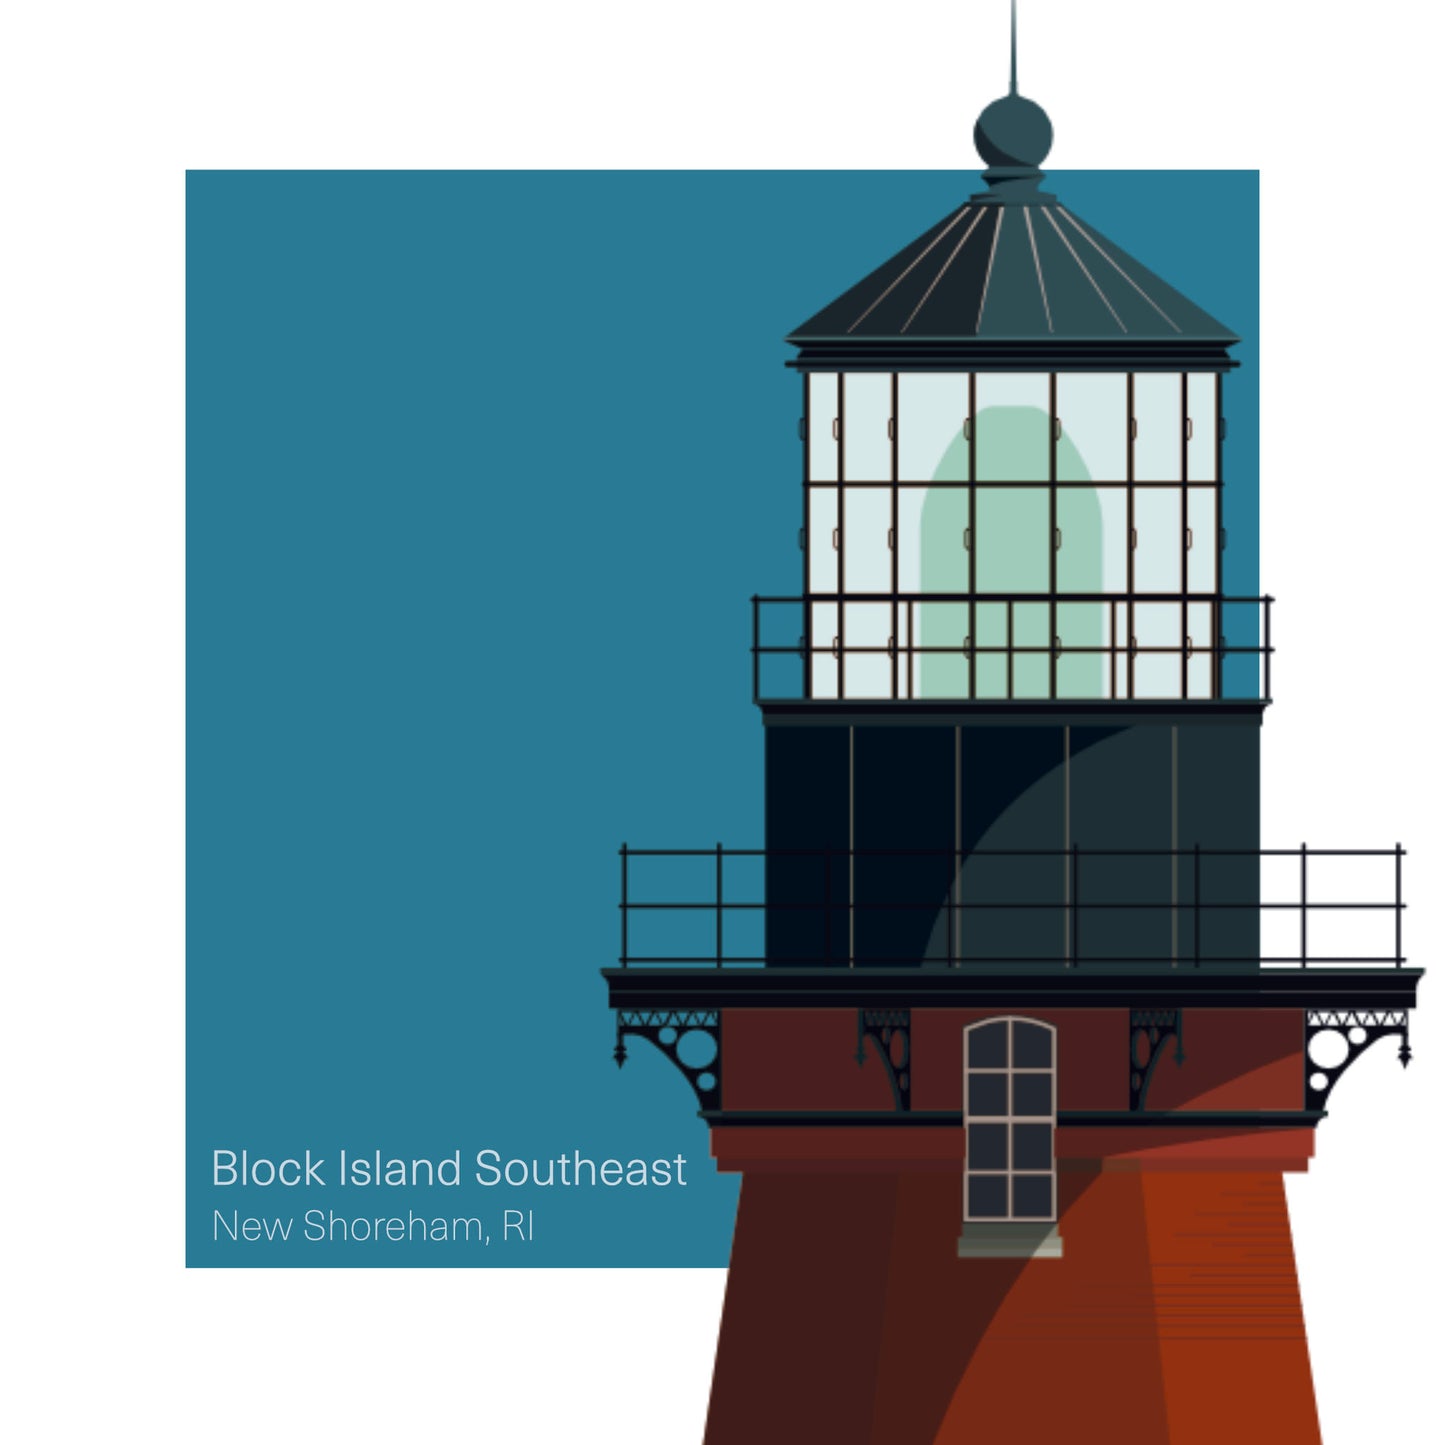 Illustration of the Block Island Southeast lighthouse, RI, USA. On a white background with aqua blue square as a backdrop.